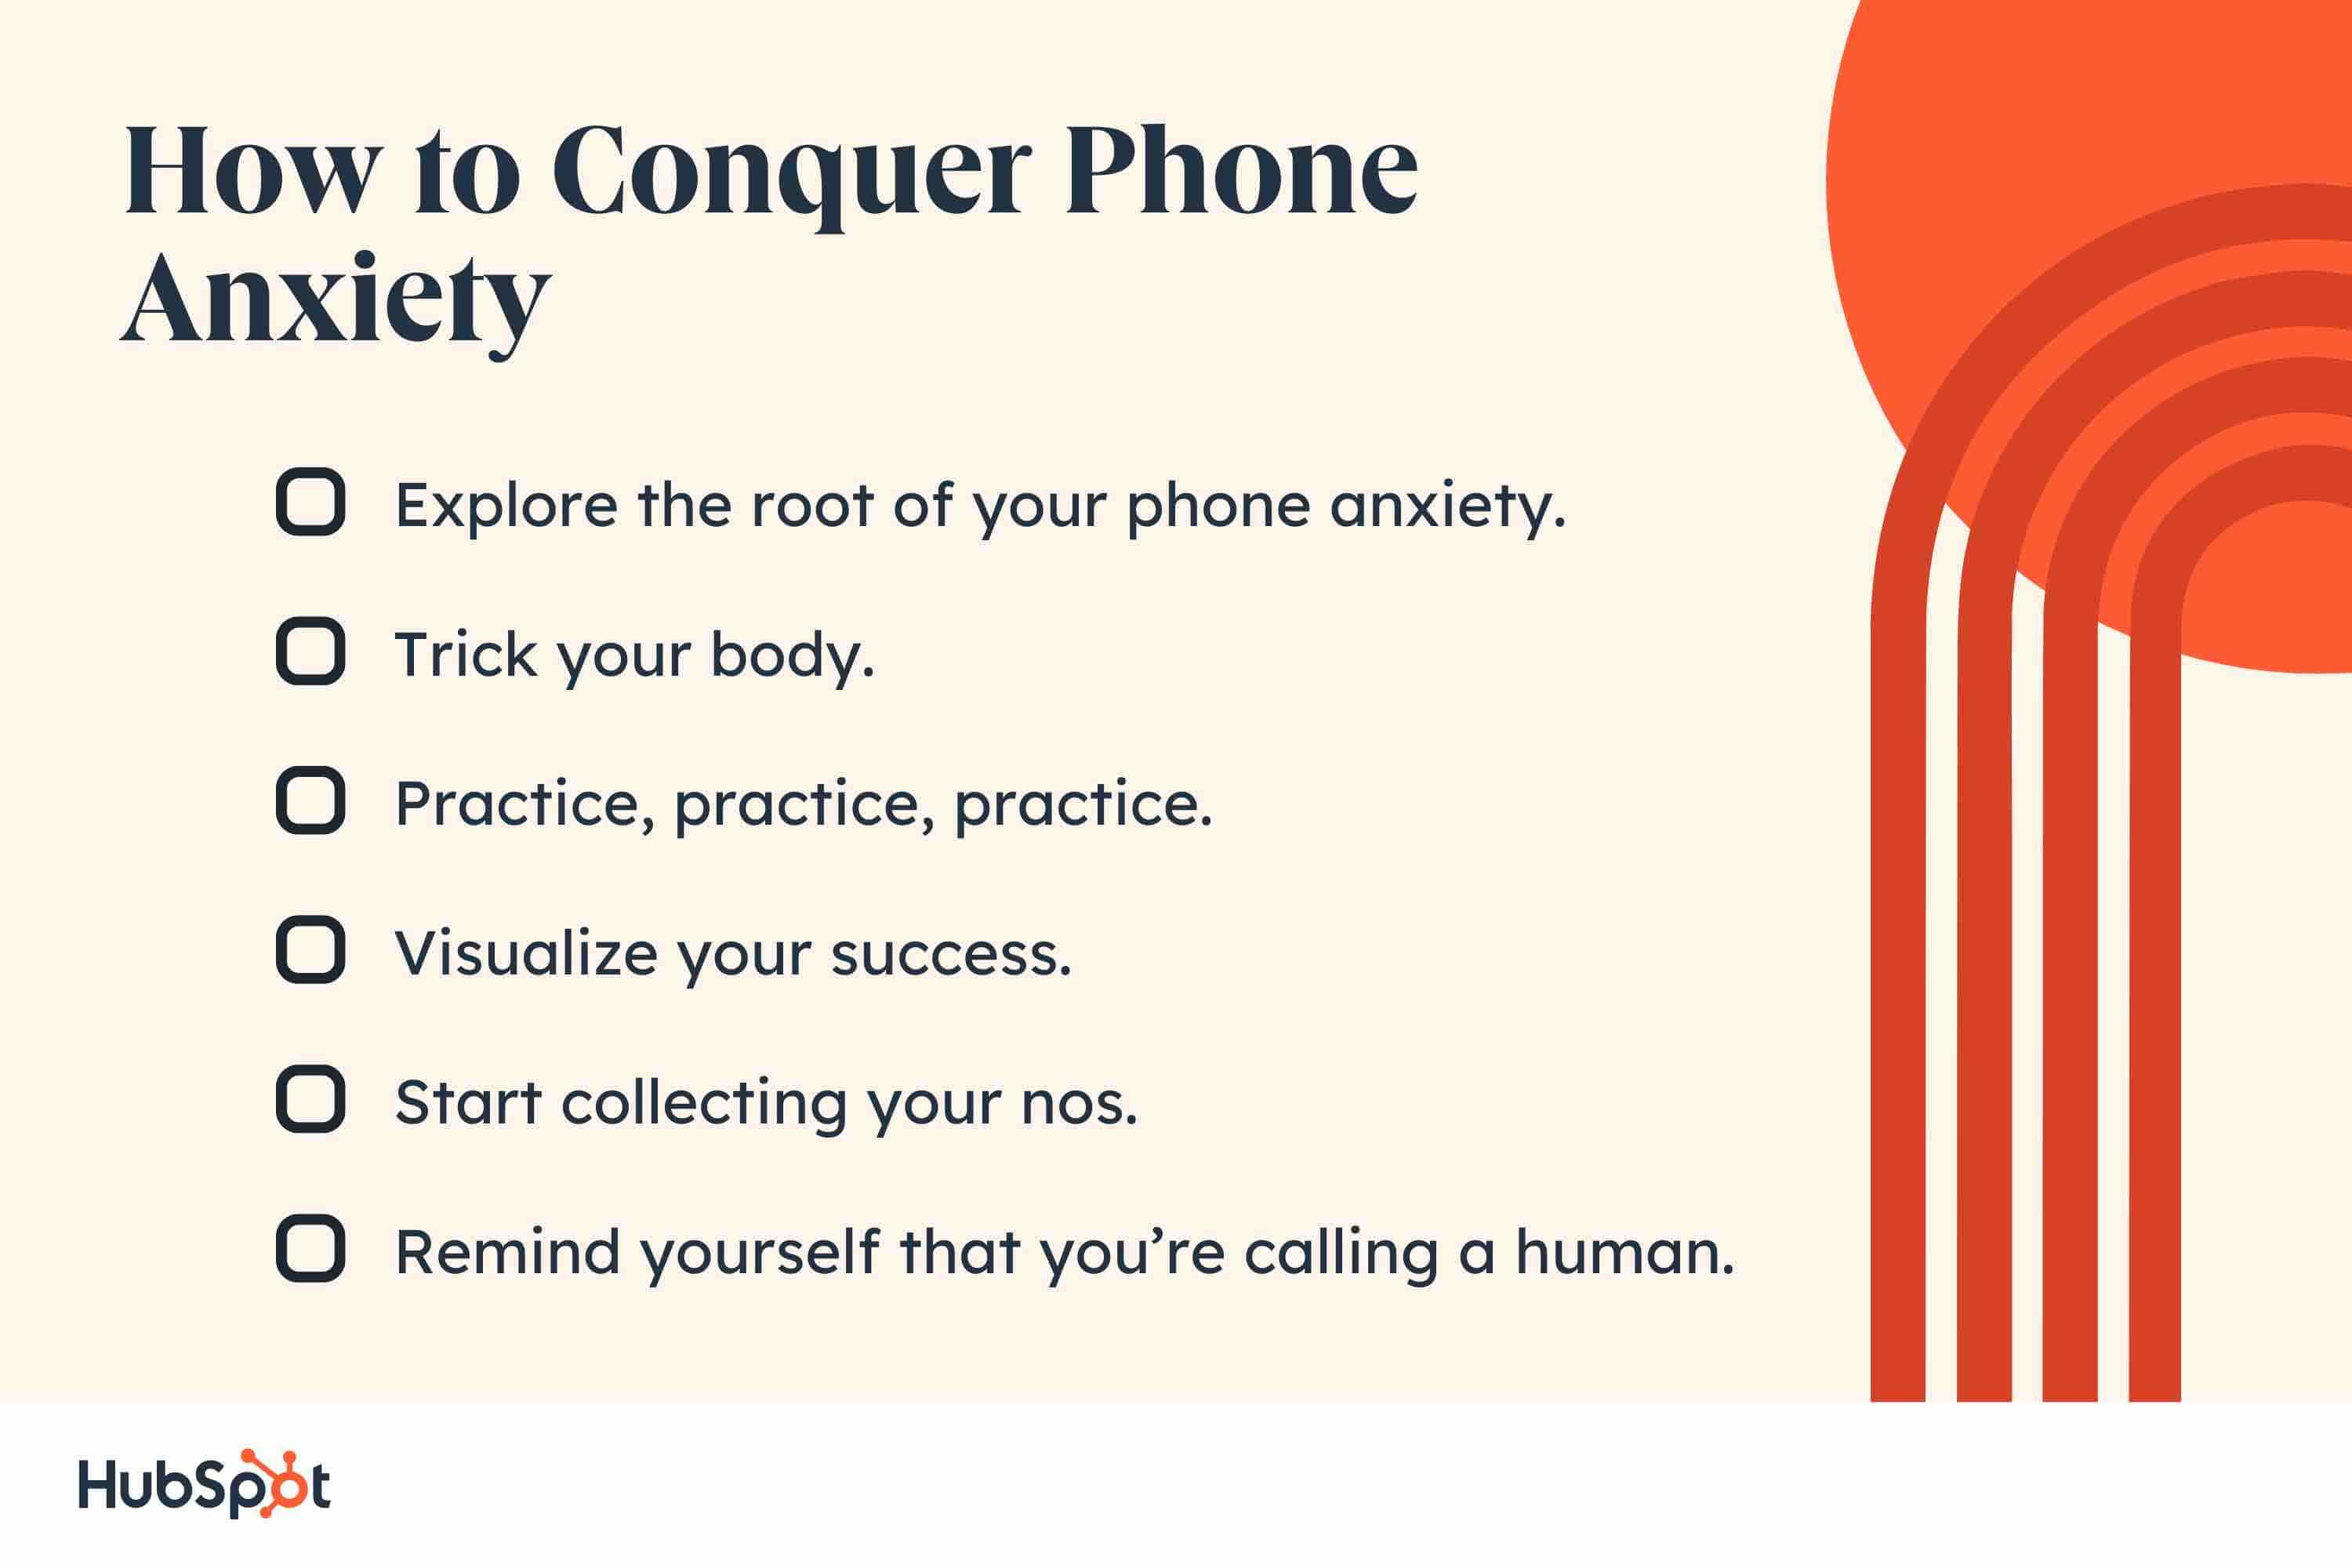 How to Conquer Phone Anxiety. Explore the root of your phone anxiety. Trick your body. Practice, practice, practice. Visualize your success. Start collecting your nos. Remind yourself that you’re calling a human.